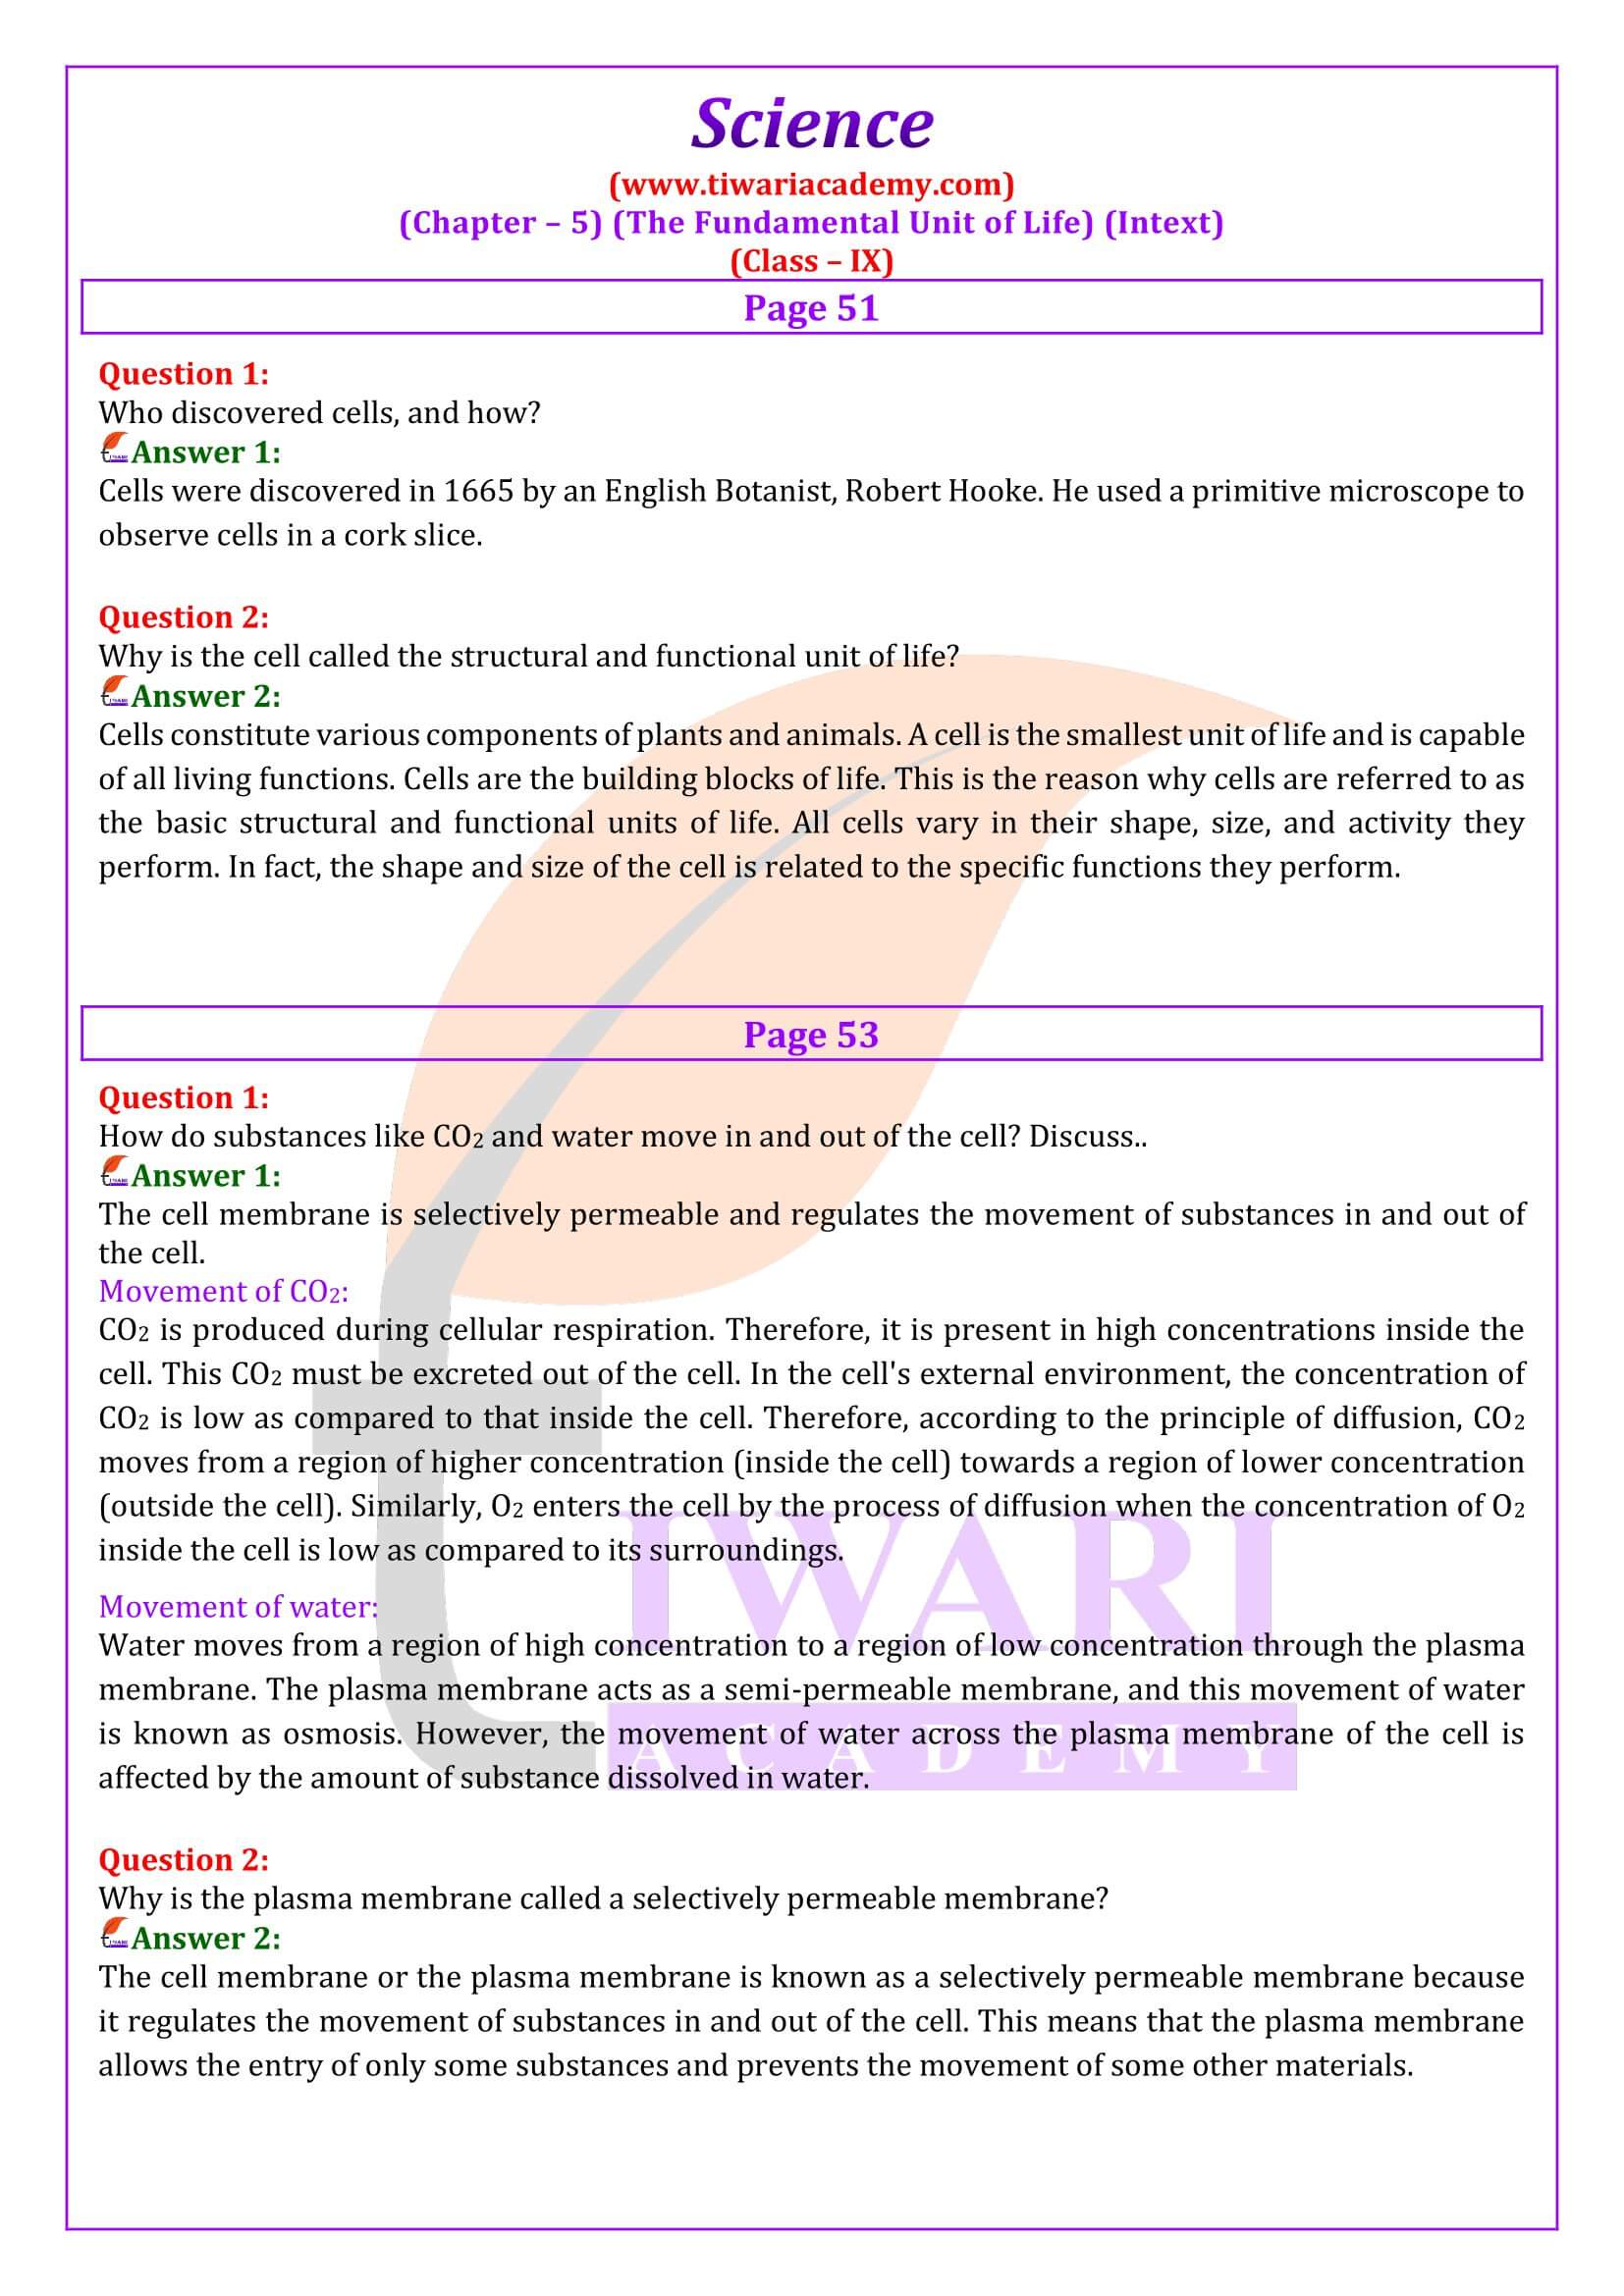 NCERT Solutions for Class 9 Science Chapter 5 Intext Questions